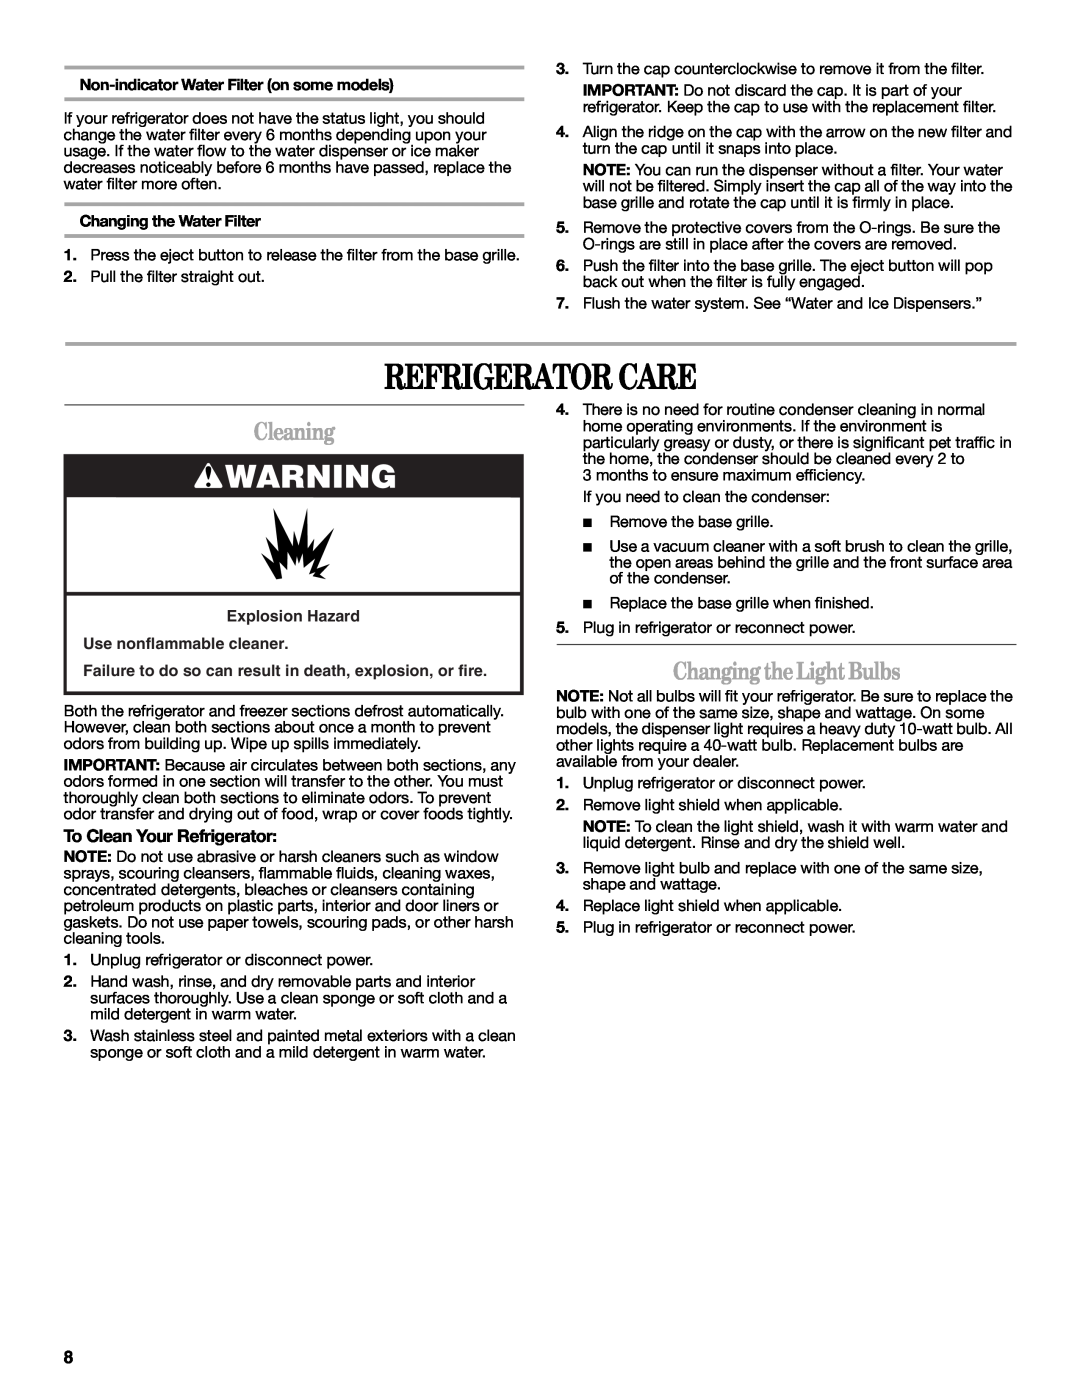 Whirlpool 2315209 warranty Refrigerator Care, Cleaning, Changing theLightBulbs, To Clean Your Refrigerator 